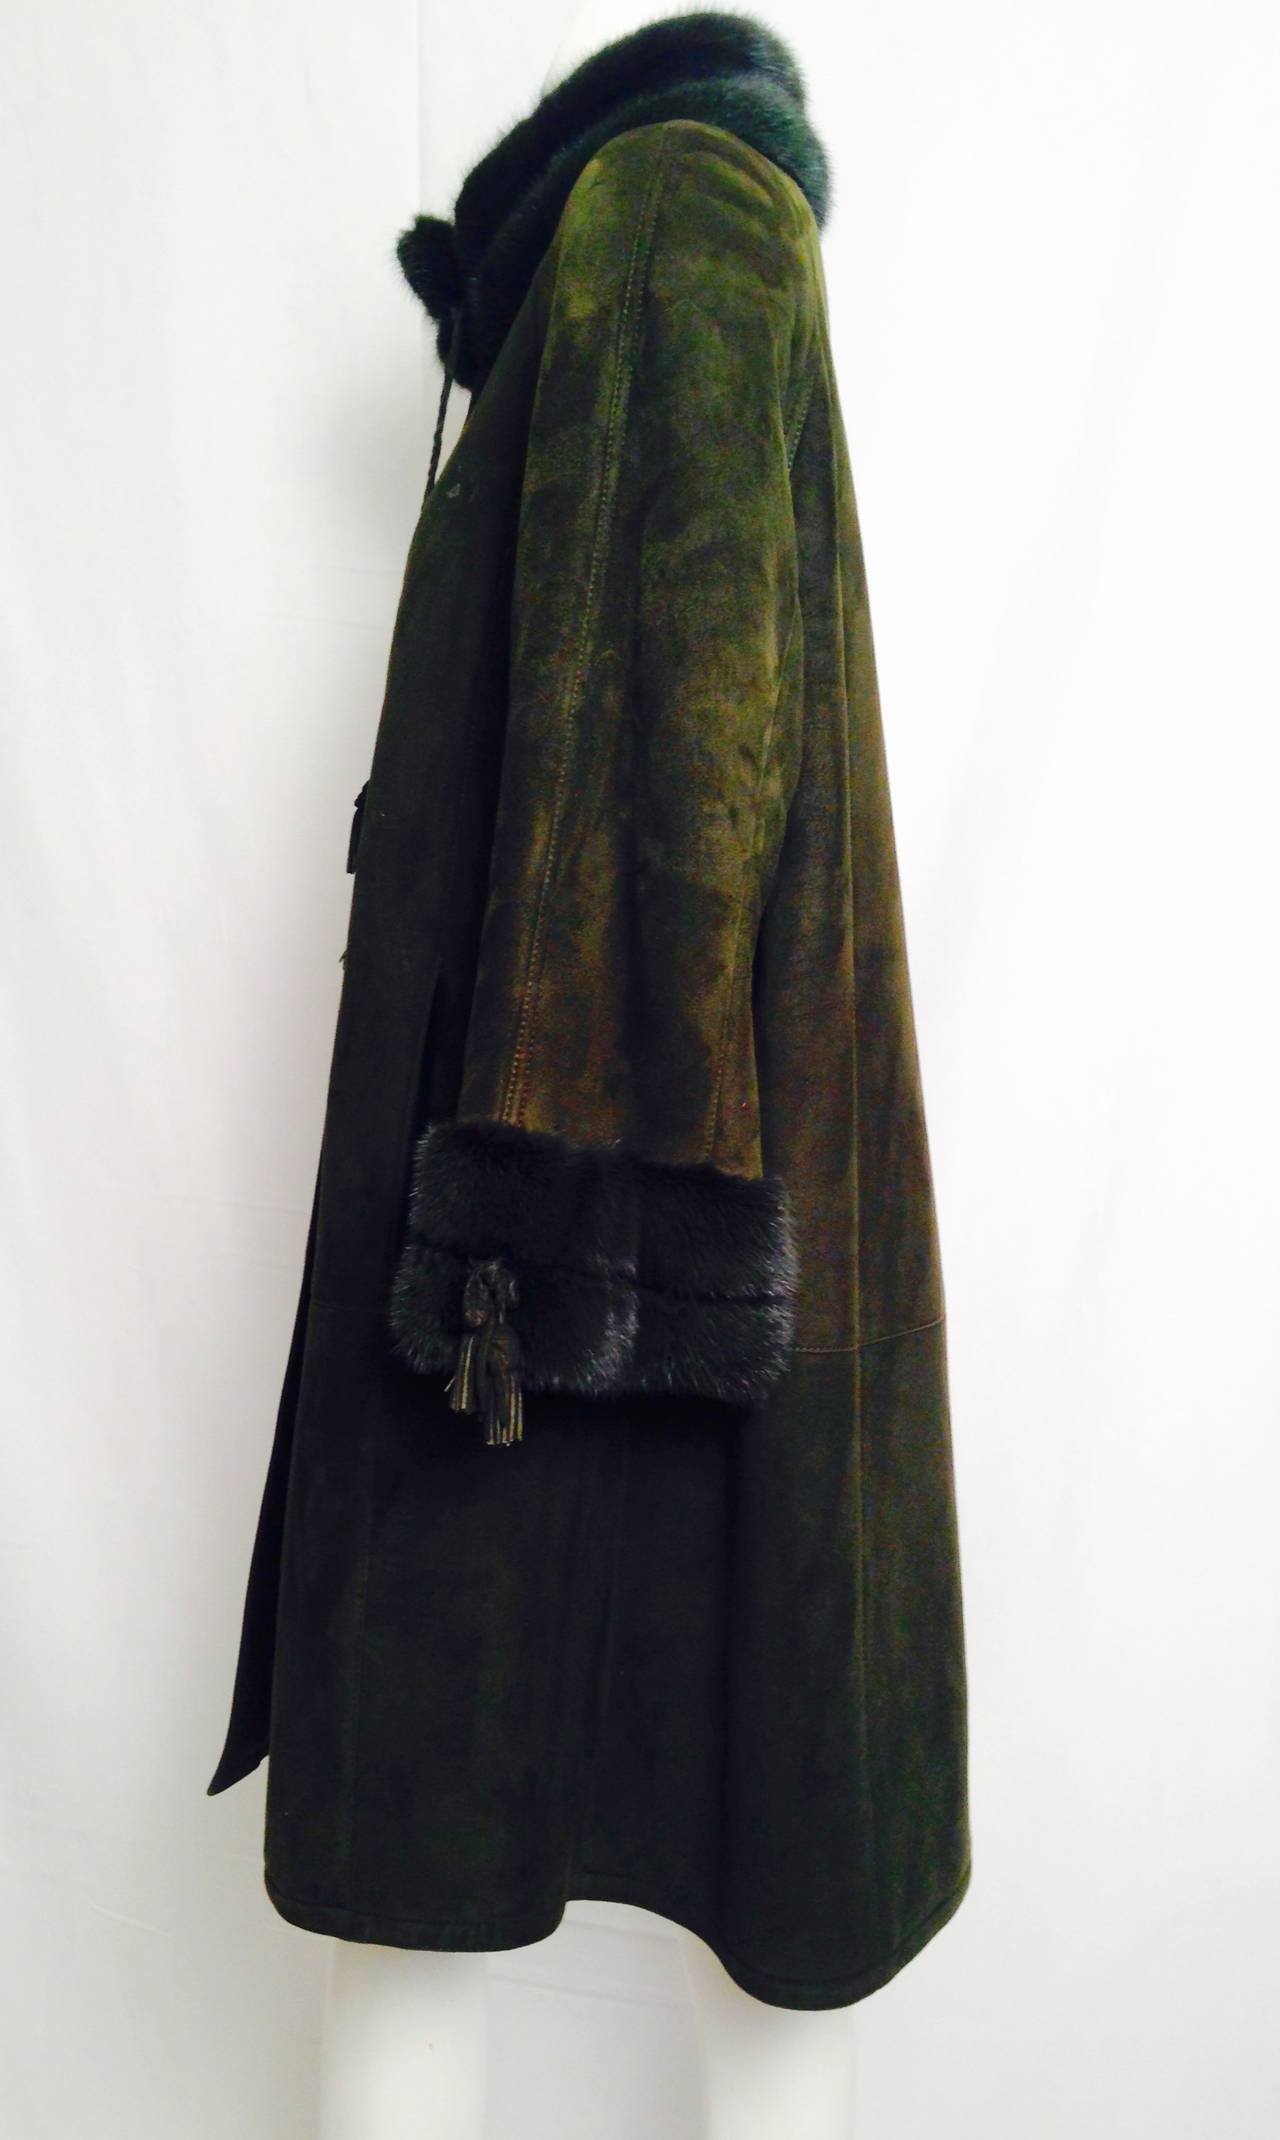 Luxurious Loden Green Shearling Swing Coat With Mink Collar and Cuffs In Excellent Condition For Sale In Palm Beach, FL